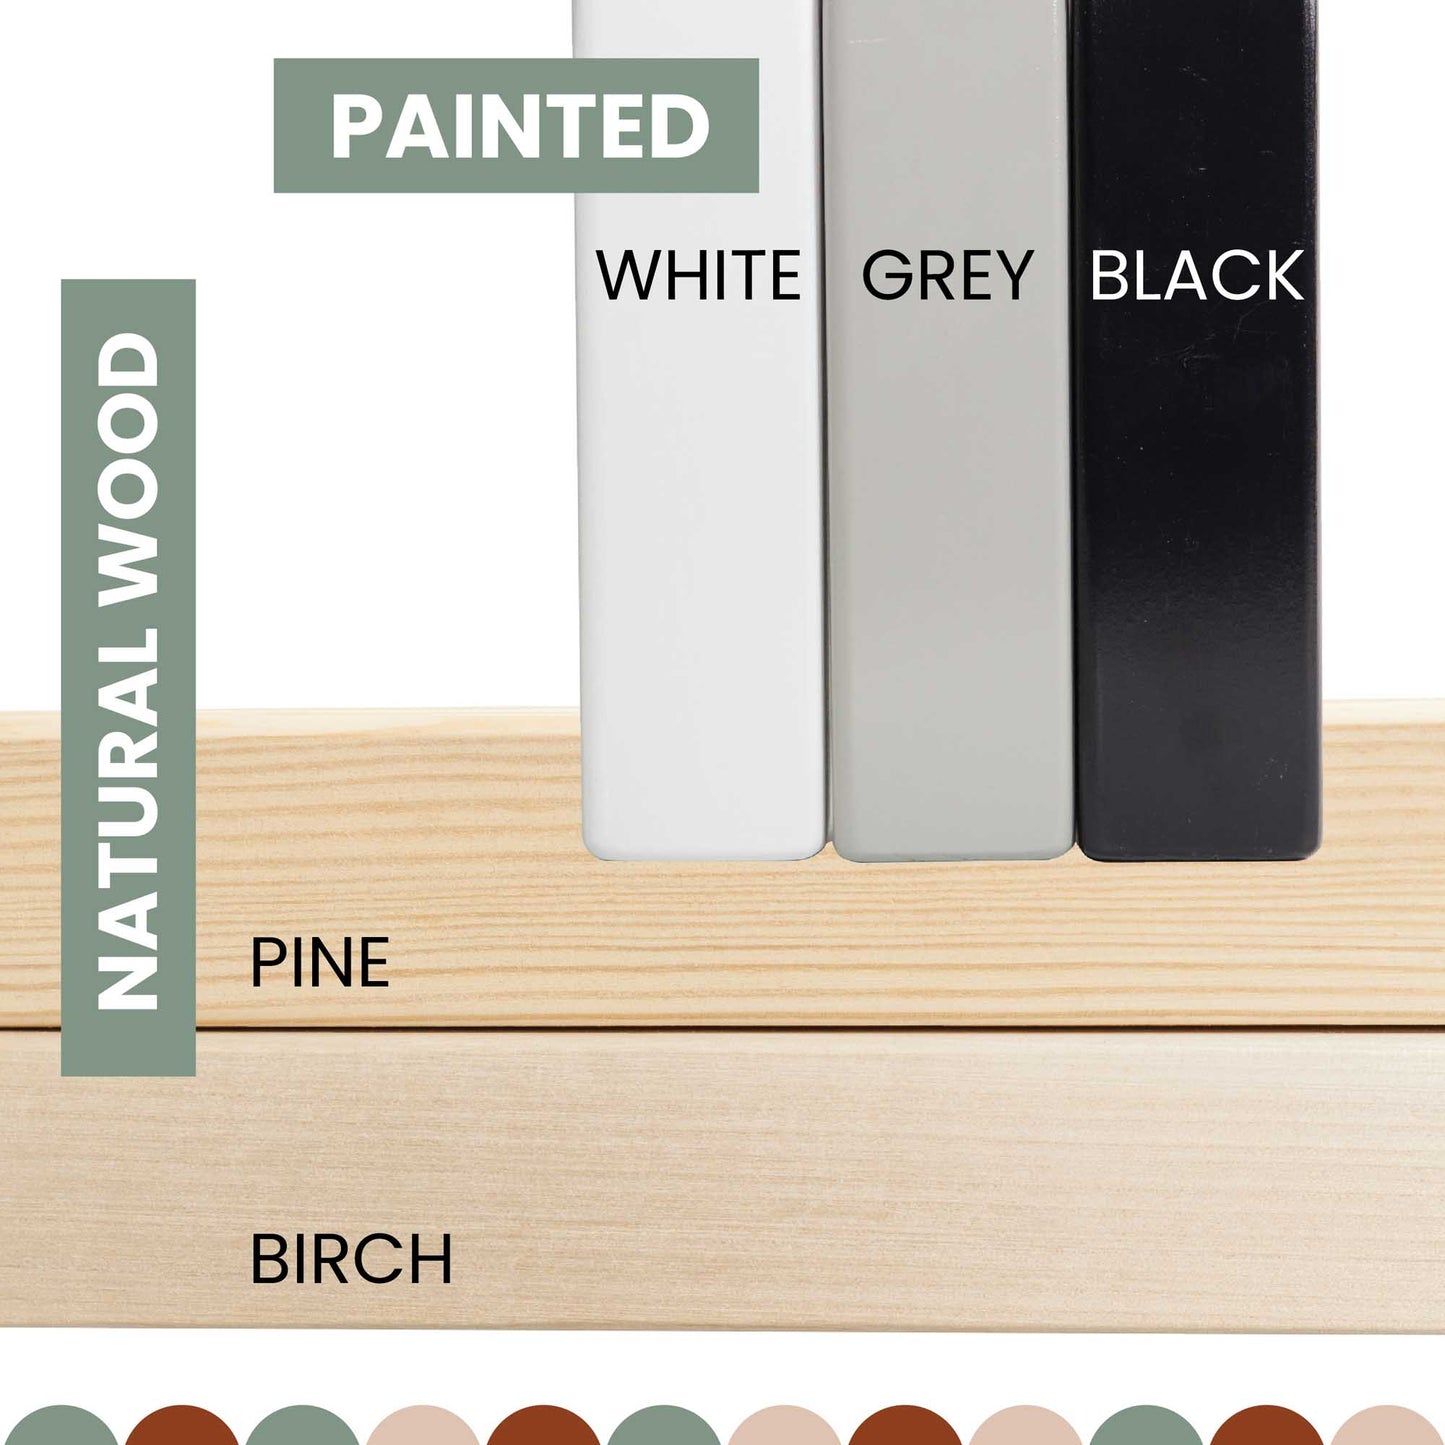 The Montessori bed with 3-sided rails features paint colors for pine, birch, and white.